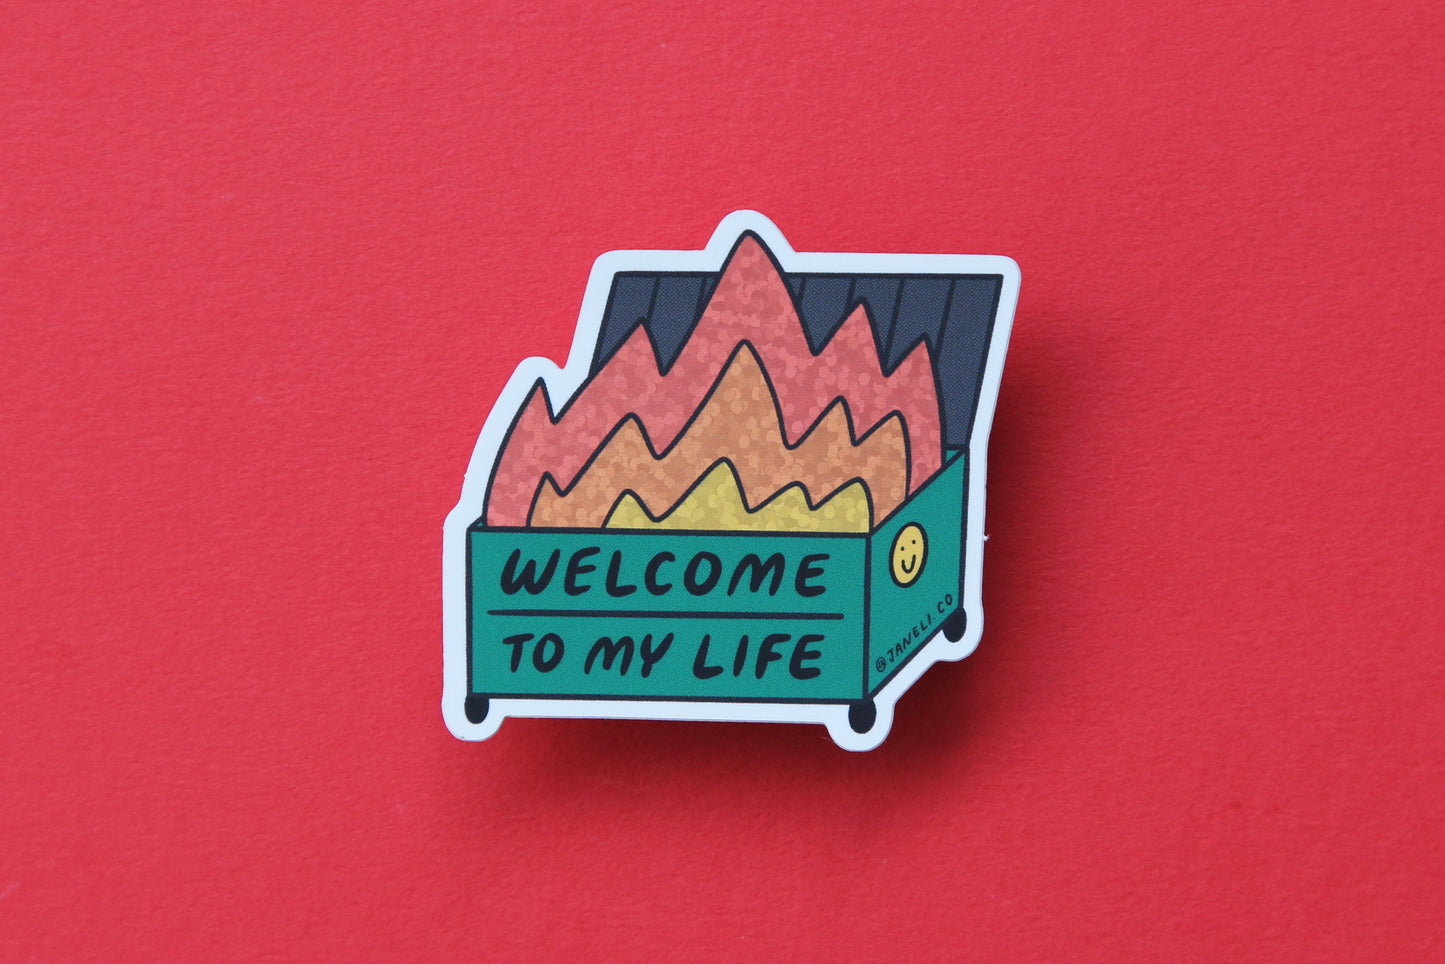 A JaneLi.Co sticker that says "Welcome to my life" in the shape of a dumpster on fire over a red background.